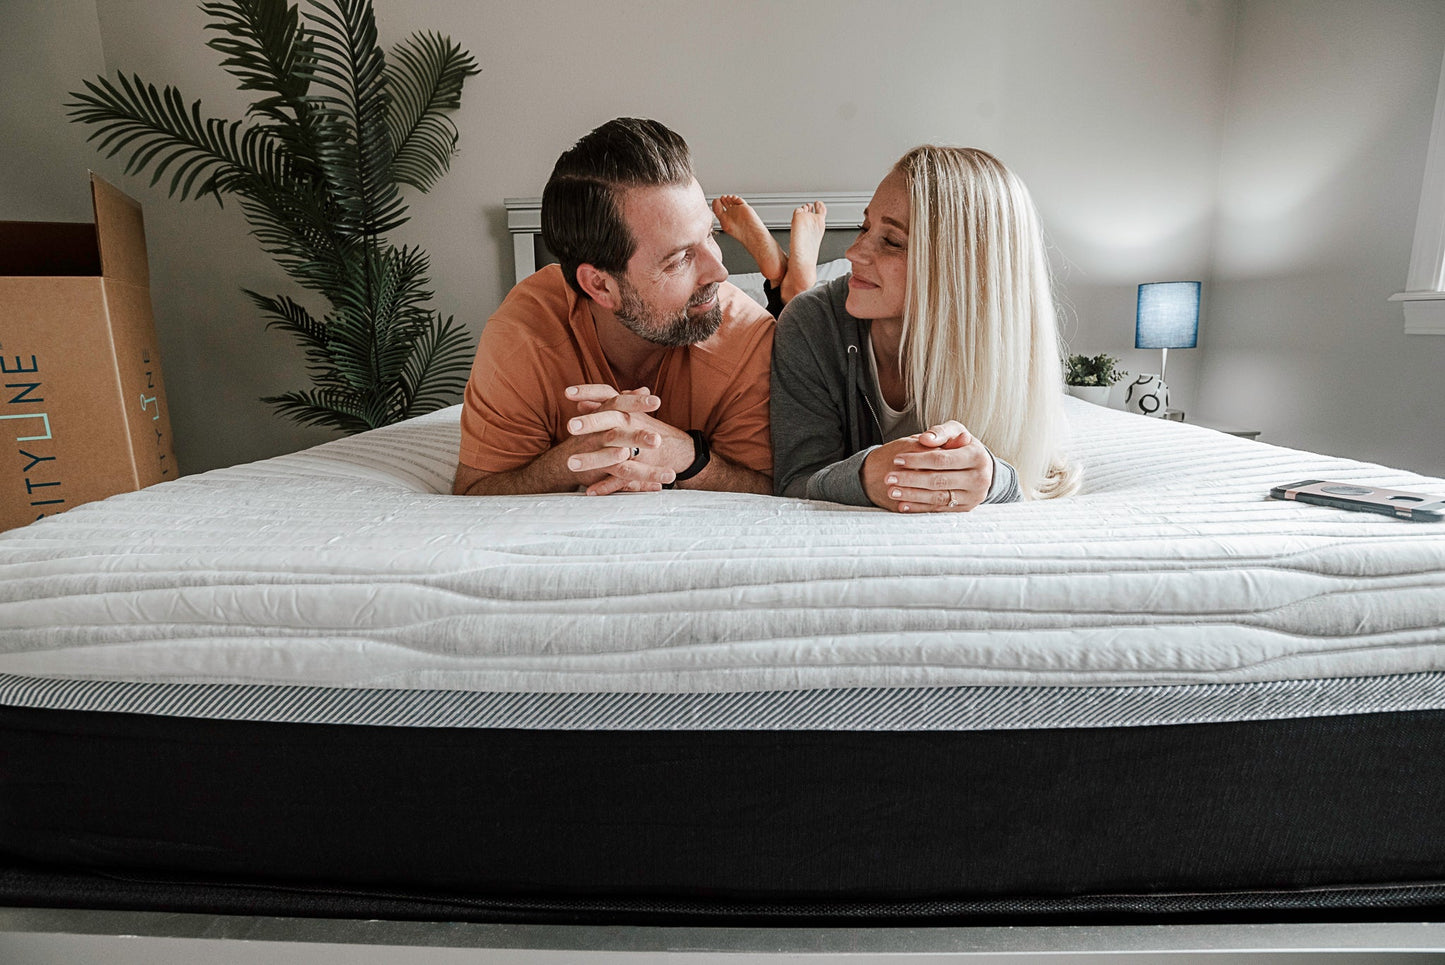 Man and Woman resting on mattress looking at each other lovingly